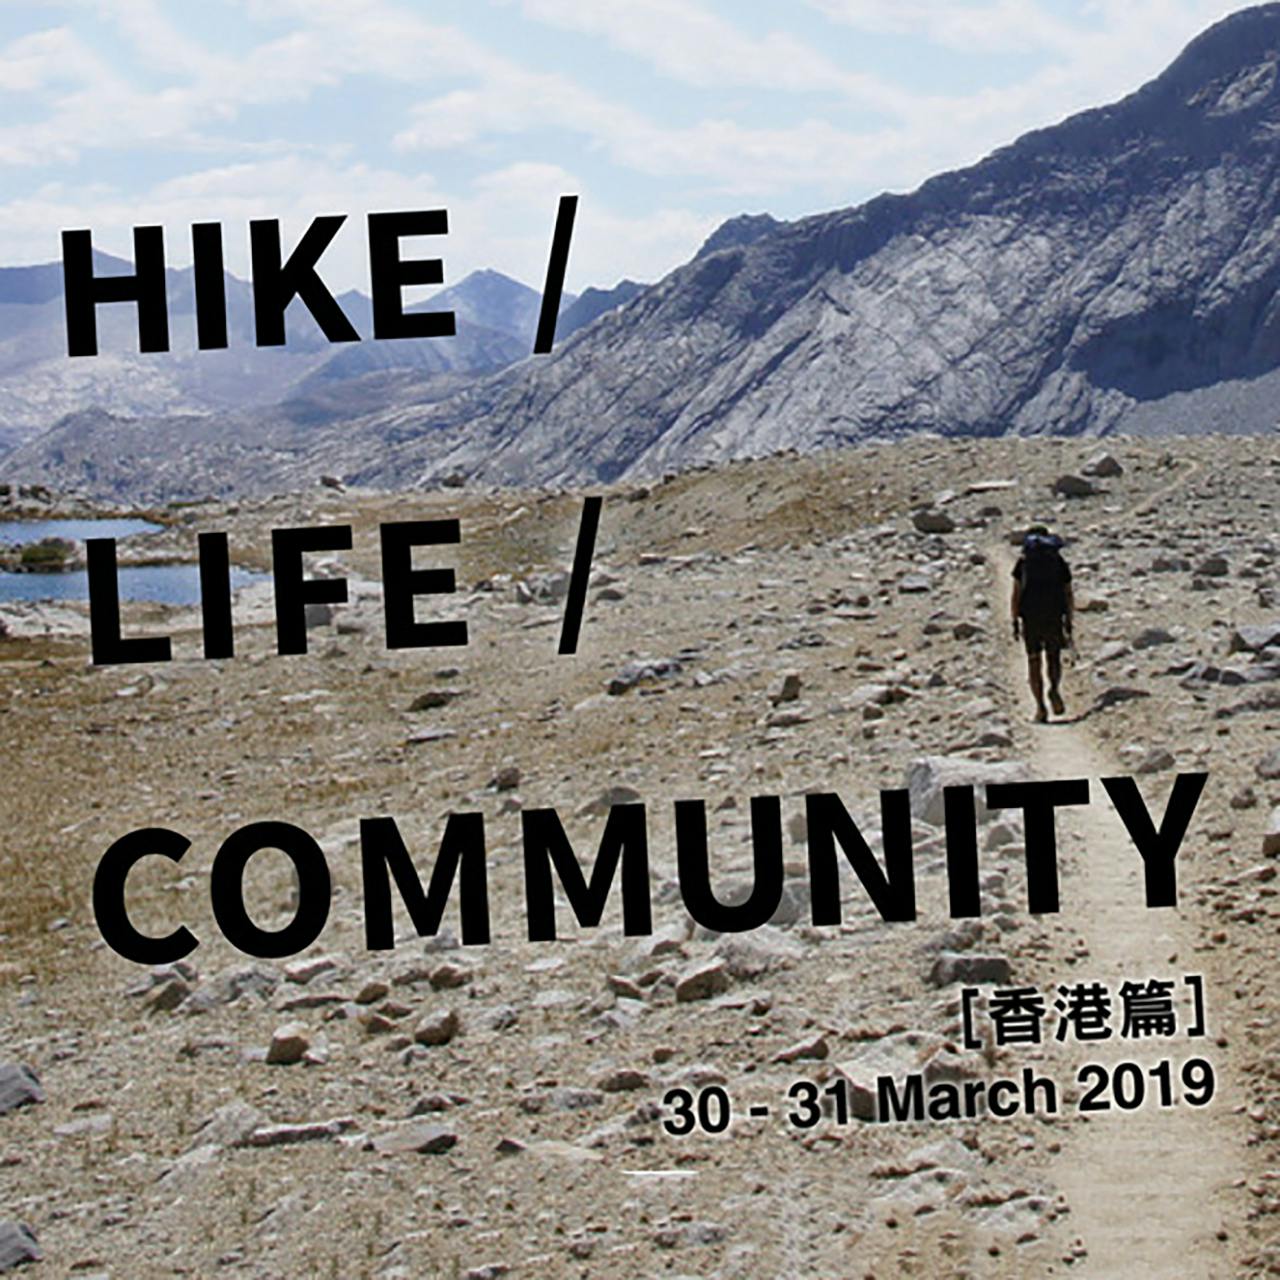 HIKE LIFE COMMUNITY 2019<br>香港 MOTHER-Outdoor Lifestyle